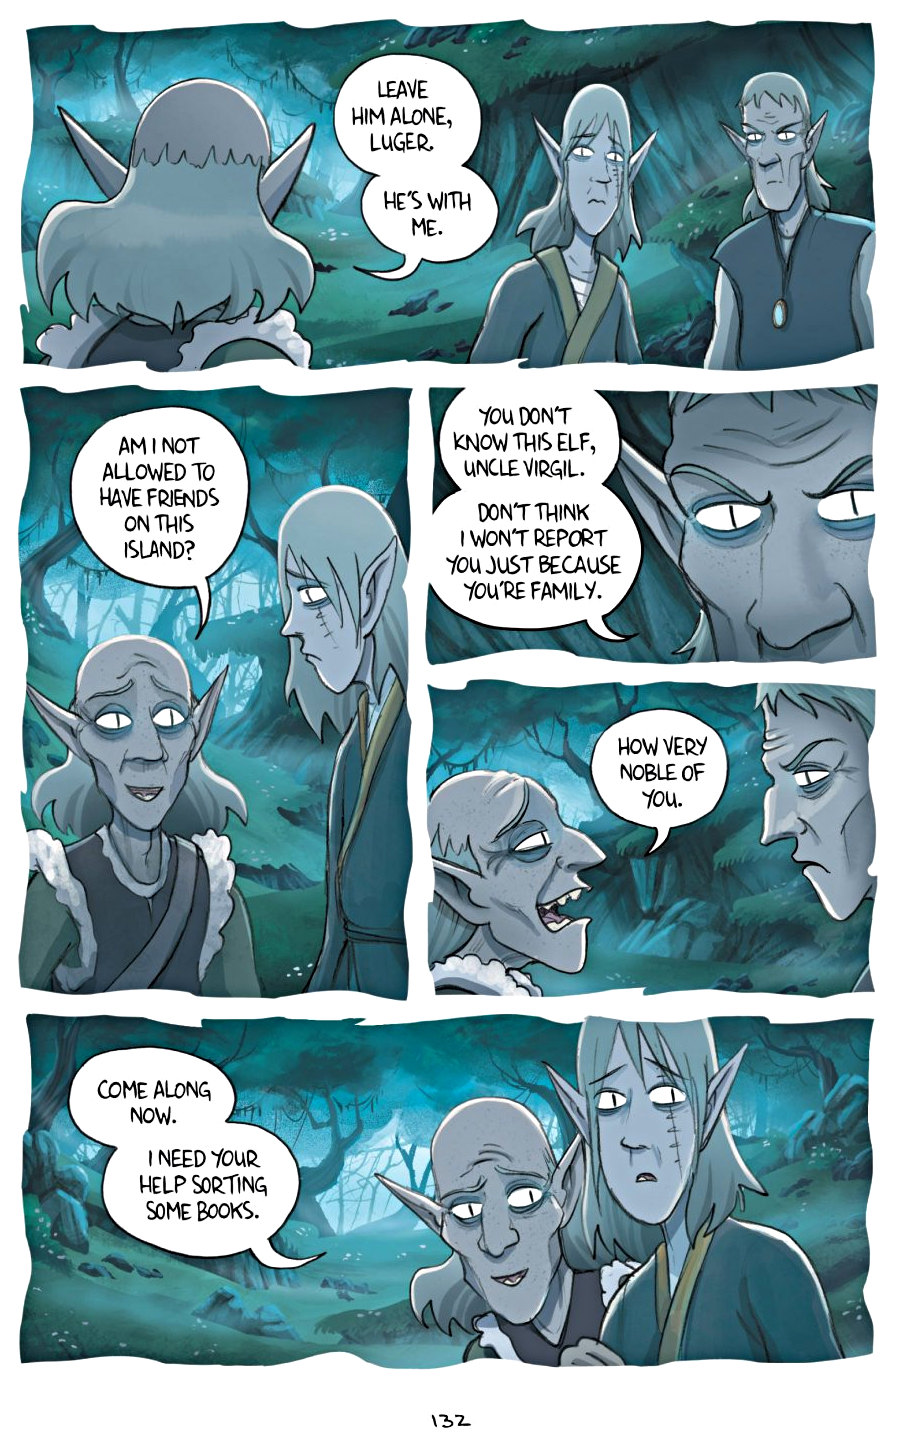 page 132 of amulet 5 prince of the elves graphic novel